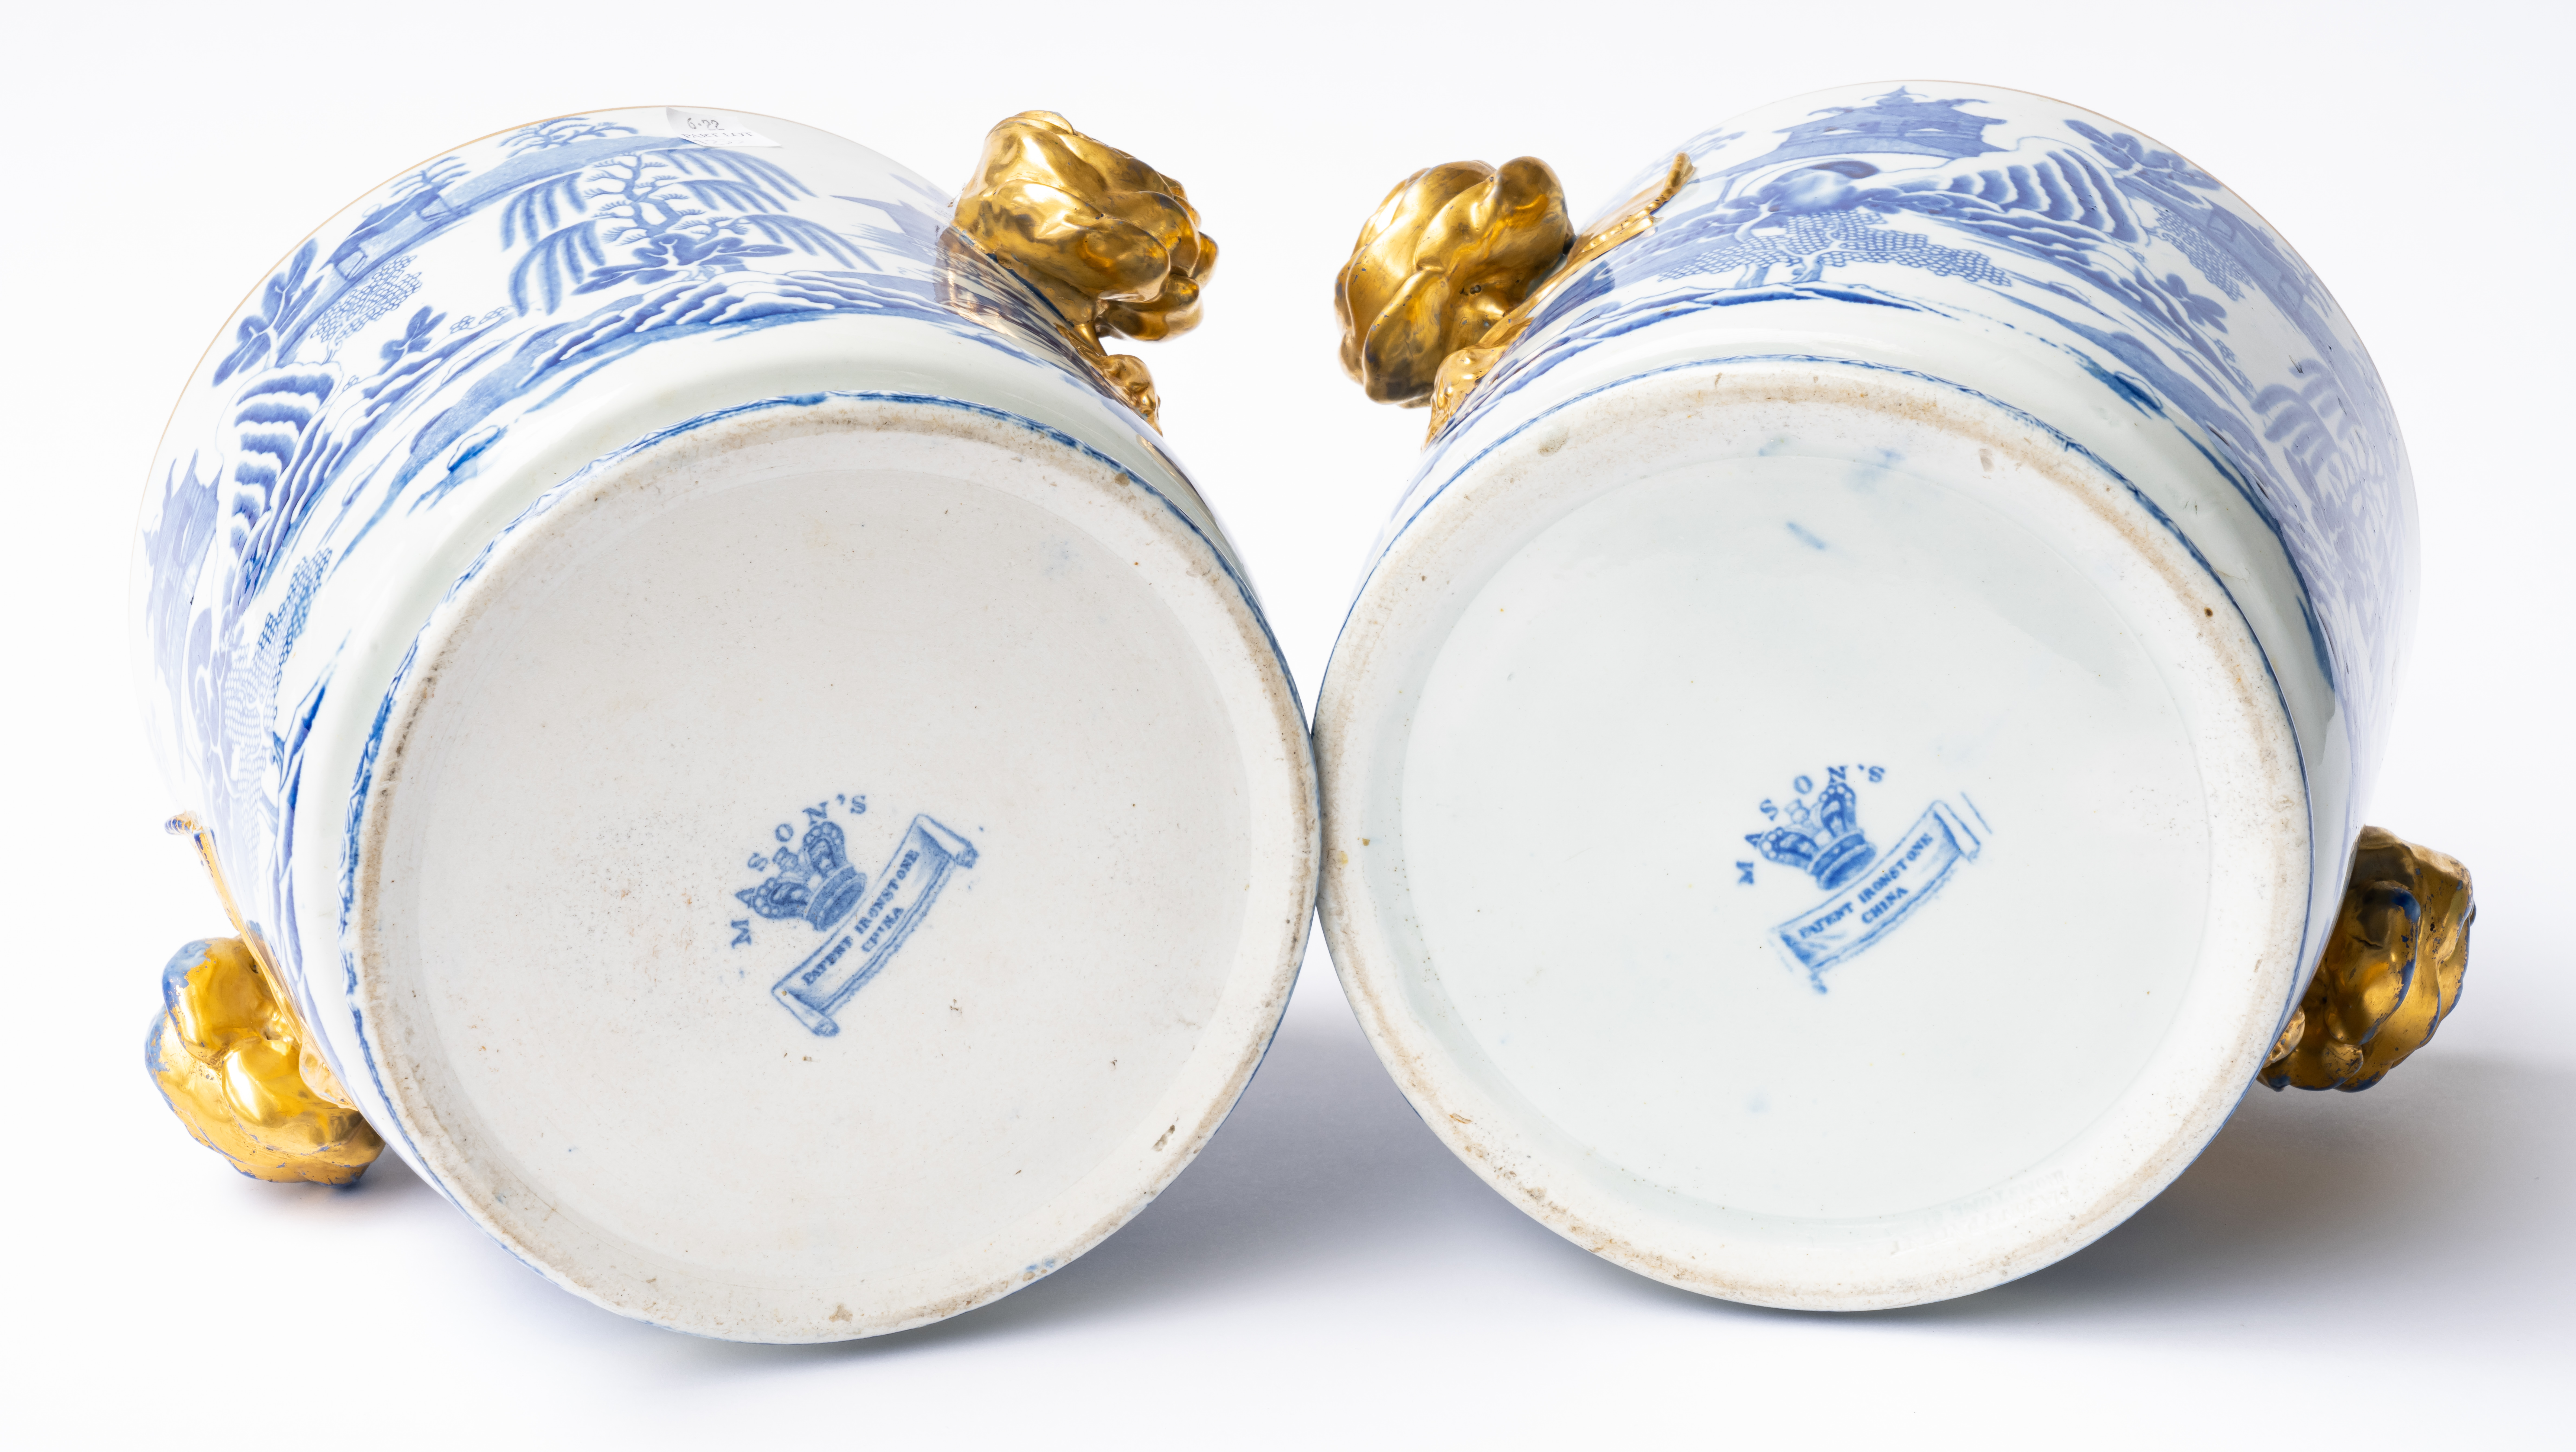 AN UNUSUAL PAIR OF MASON'S IRONSTONE WINE COOLERS OR JARDINIERES (2) - Image 5 of 6